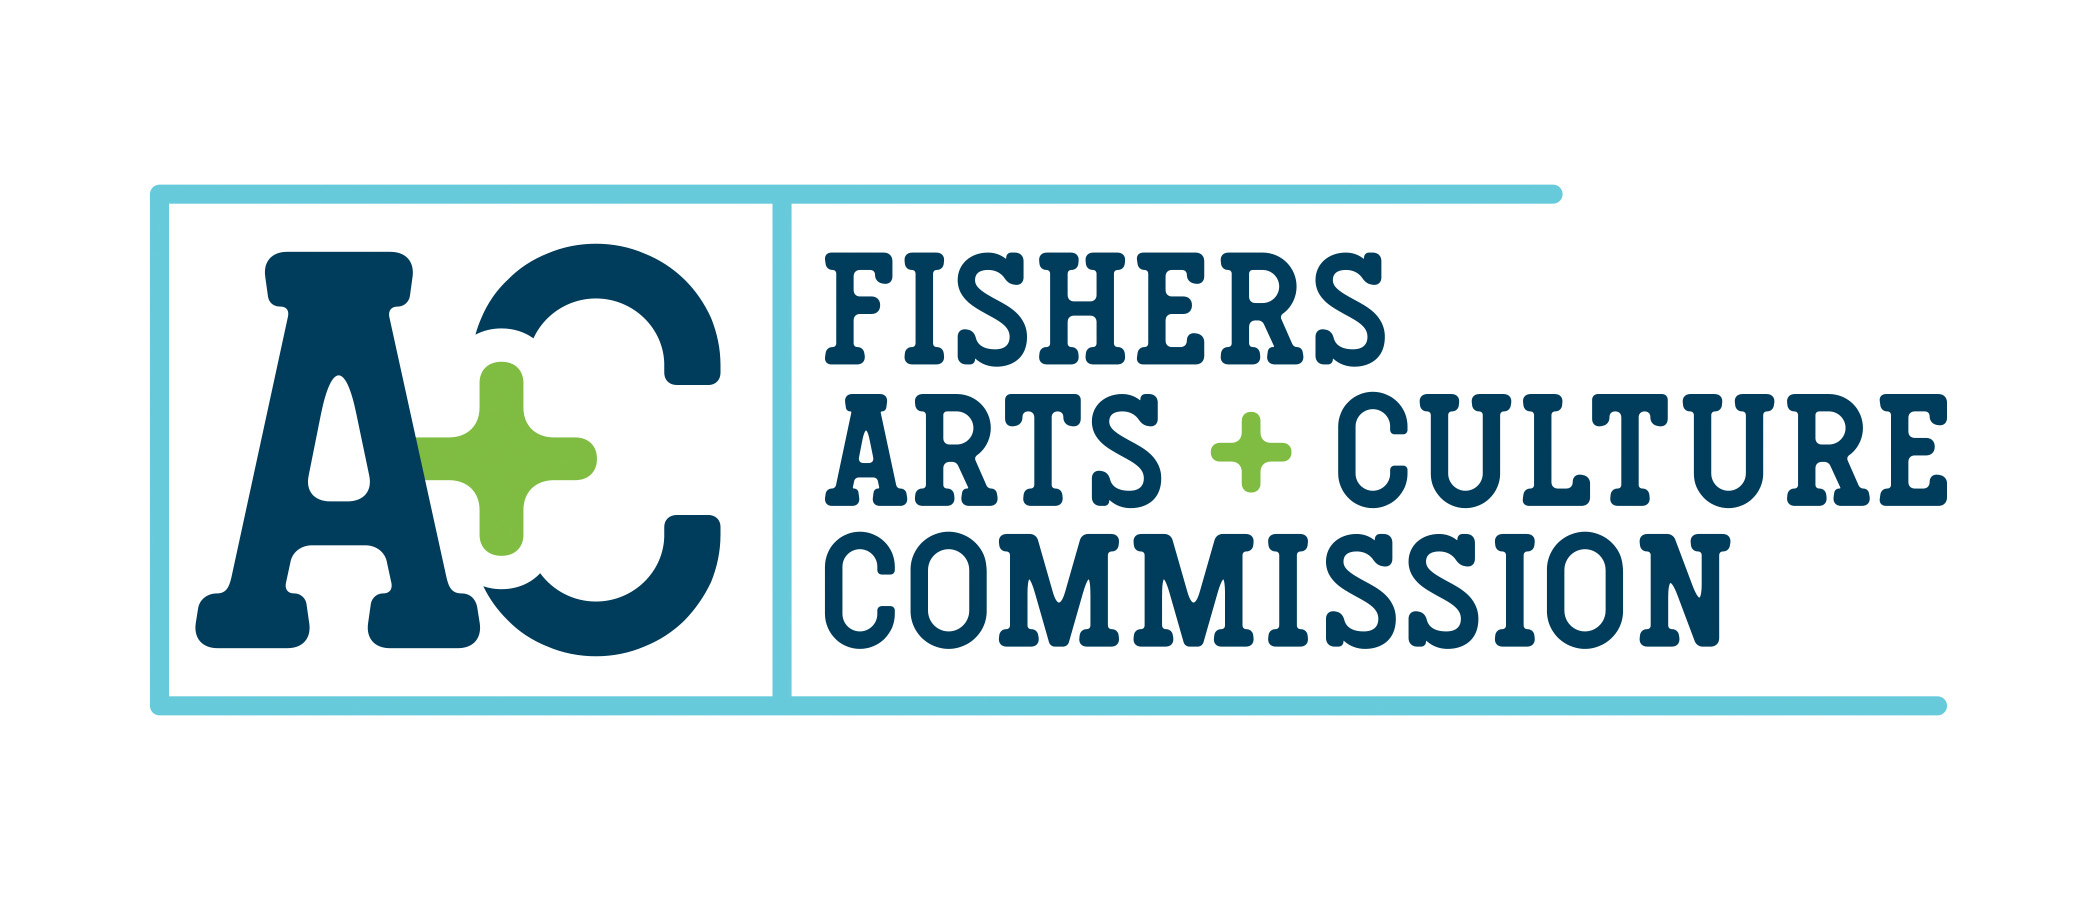 The Fishers Arts and Culture Commission logo in navy blue and green.